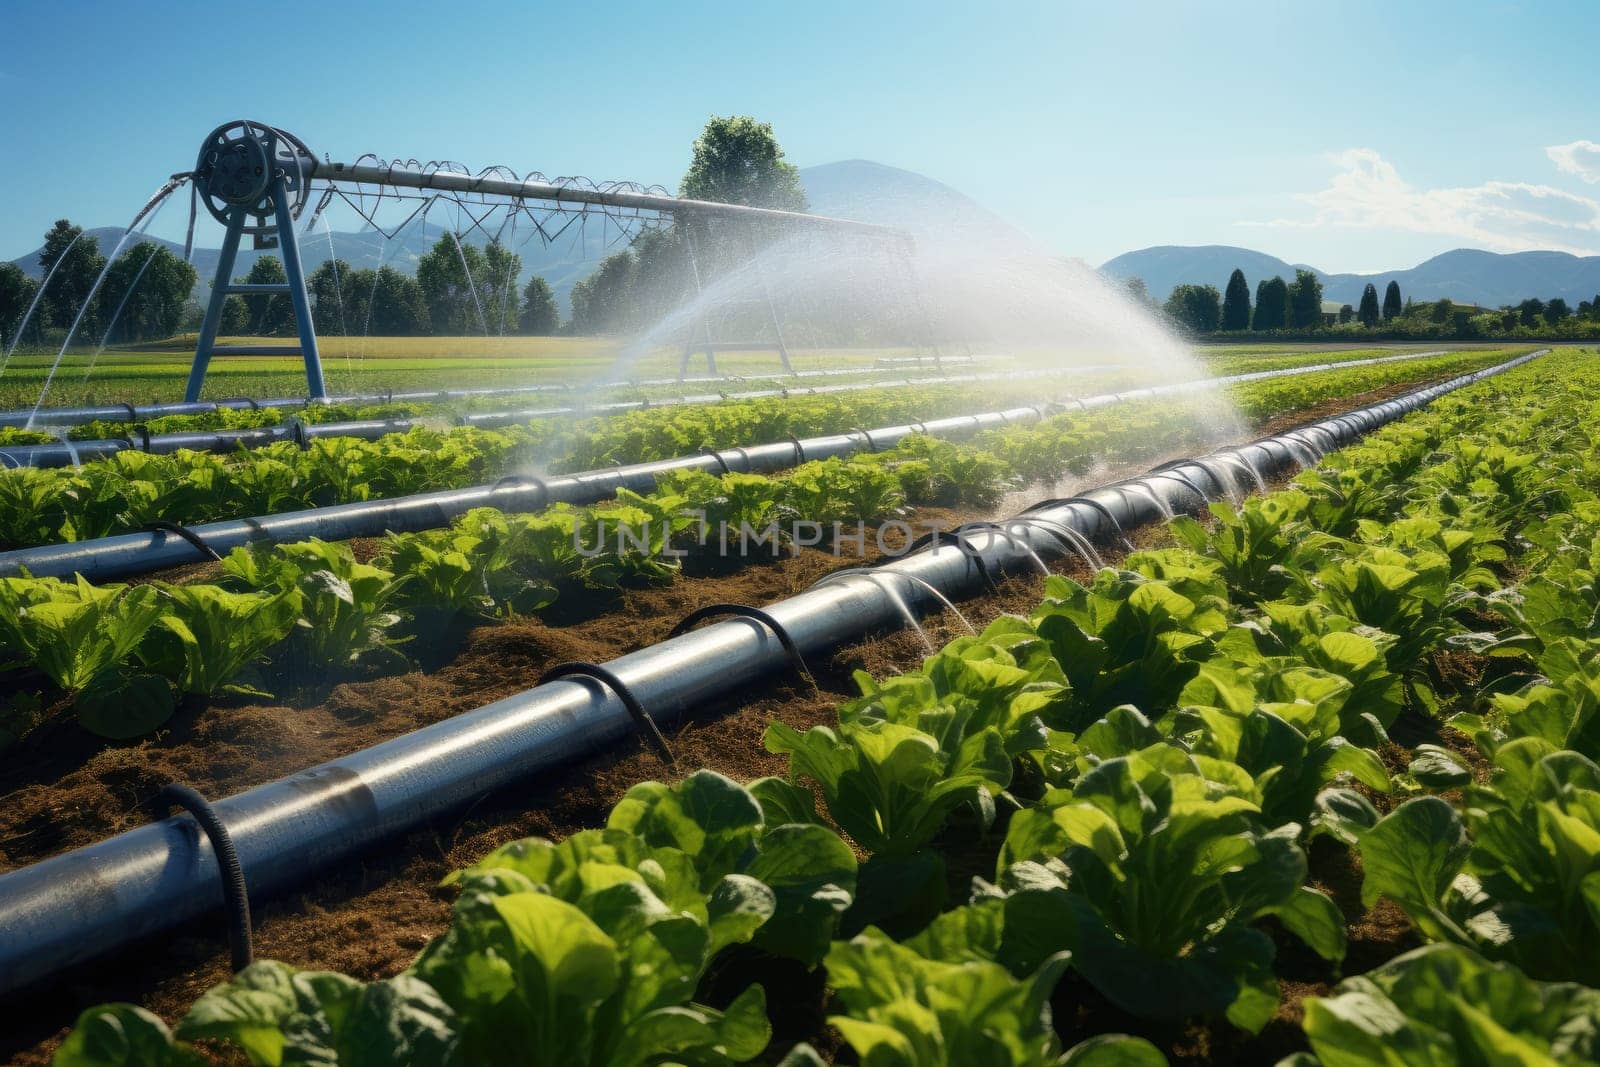 Smart watering system ensuring plants receive adequate irrigation by Yurich32